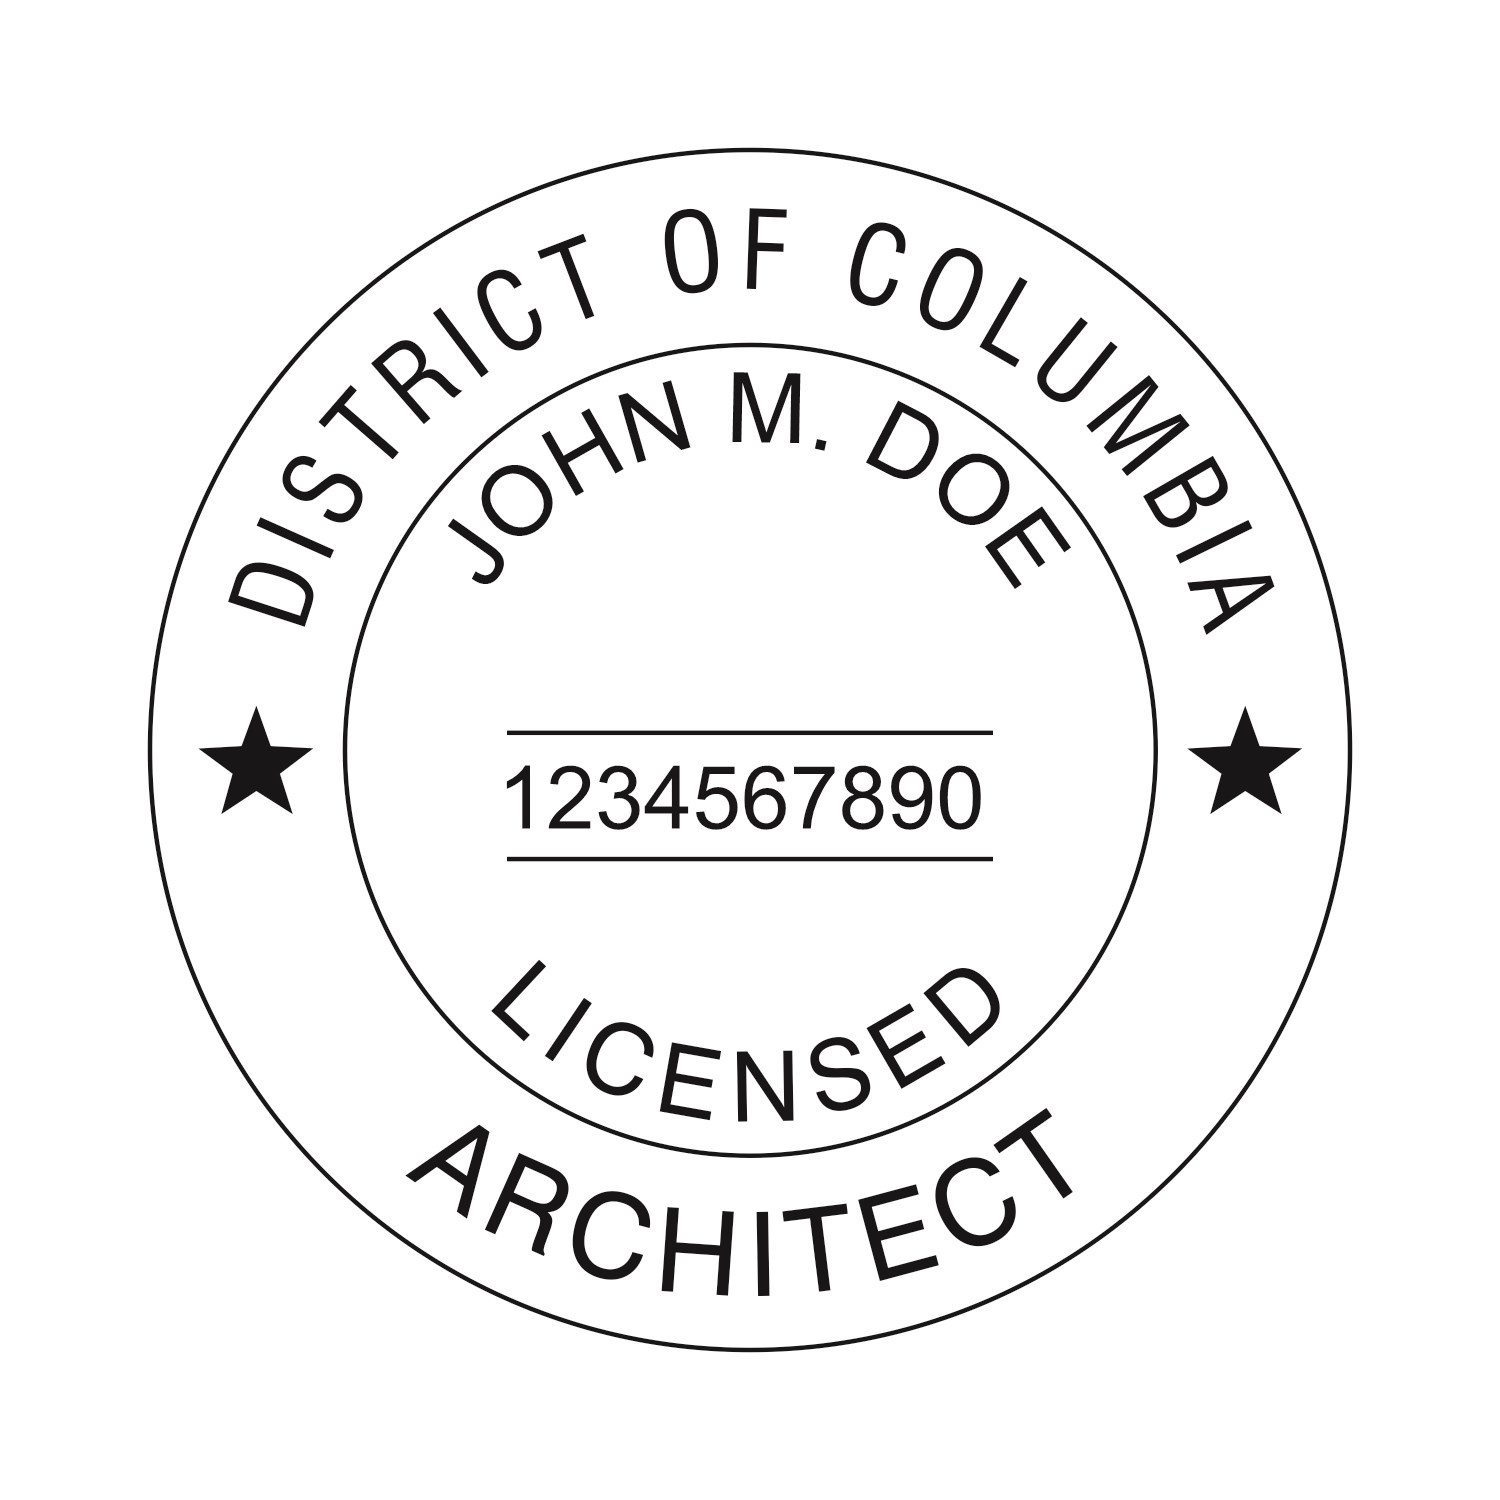 Architect Seal - Pre Inked Stamp - Dist of Columbia